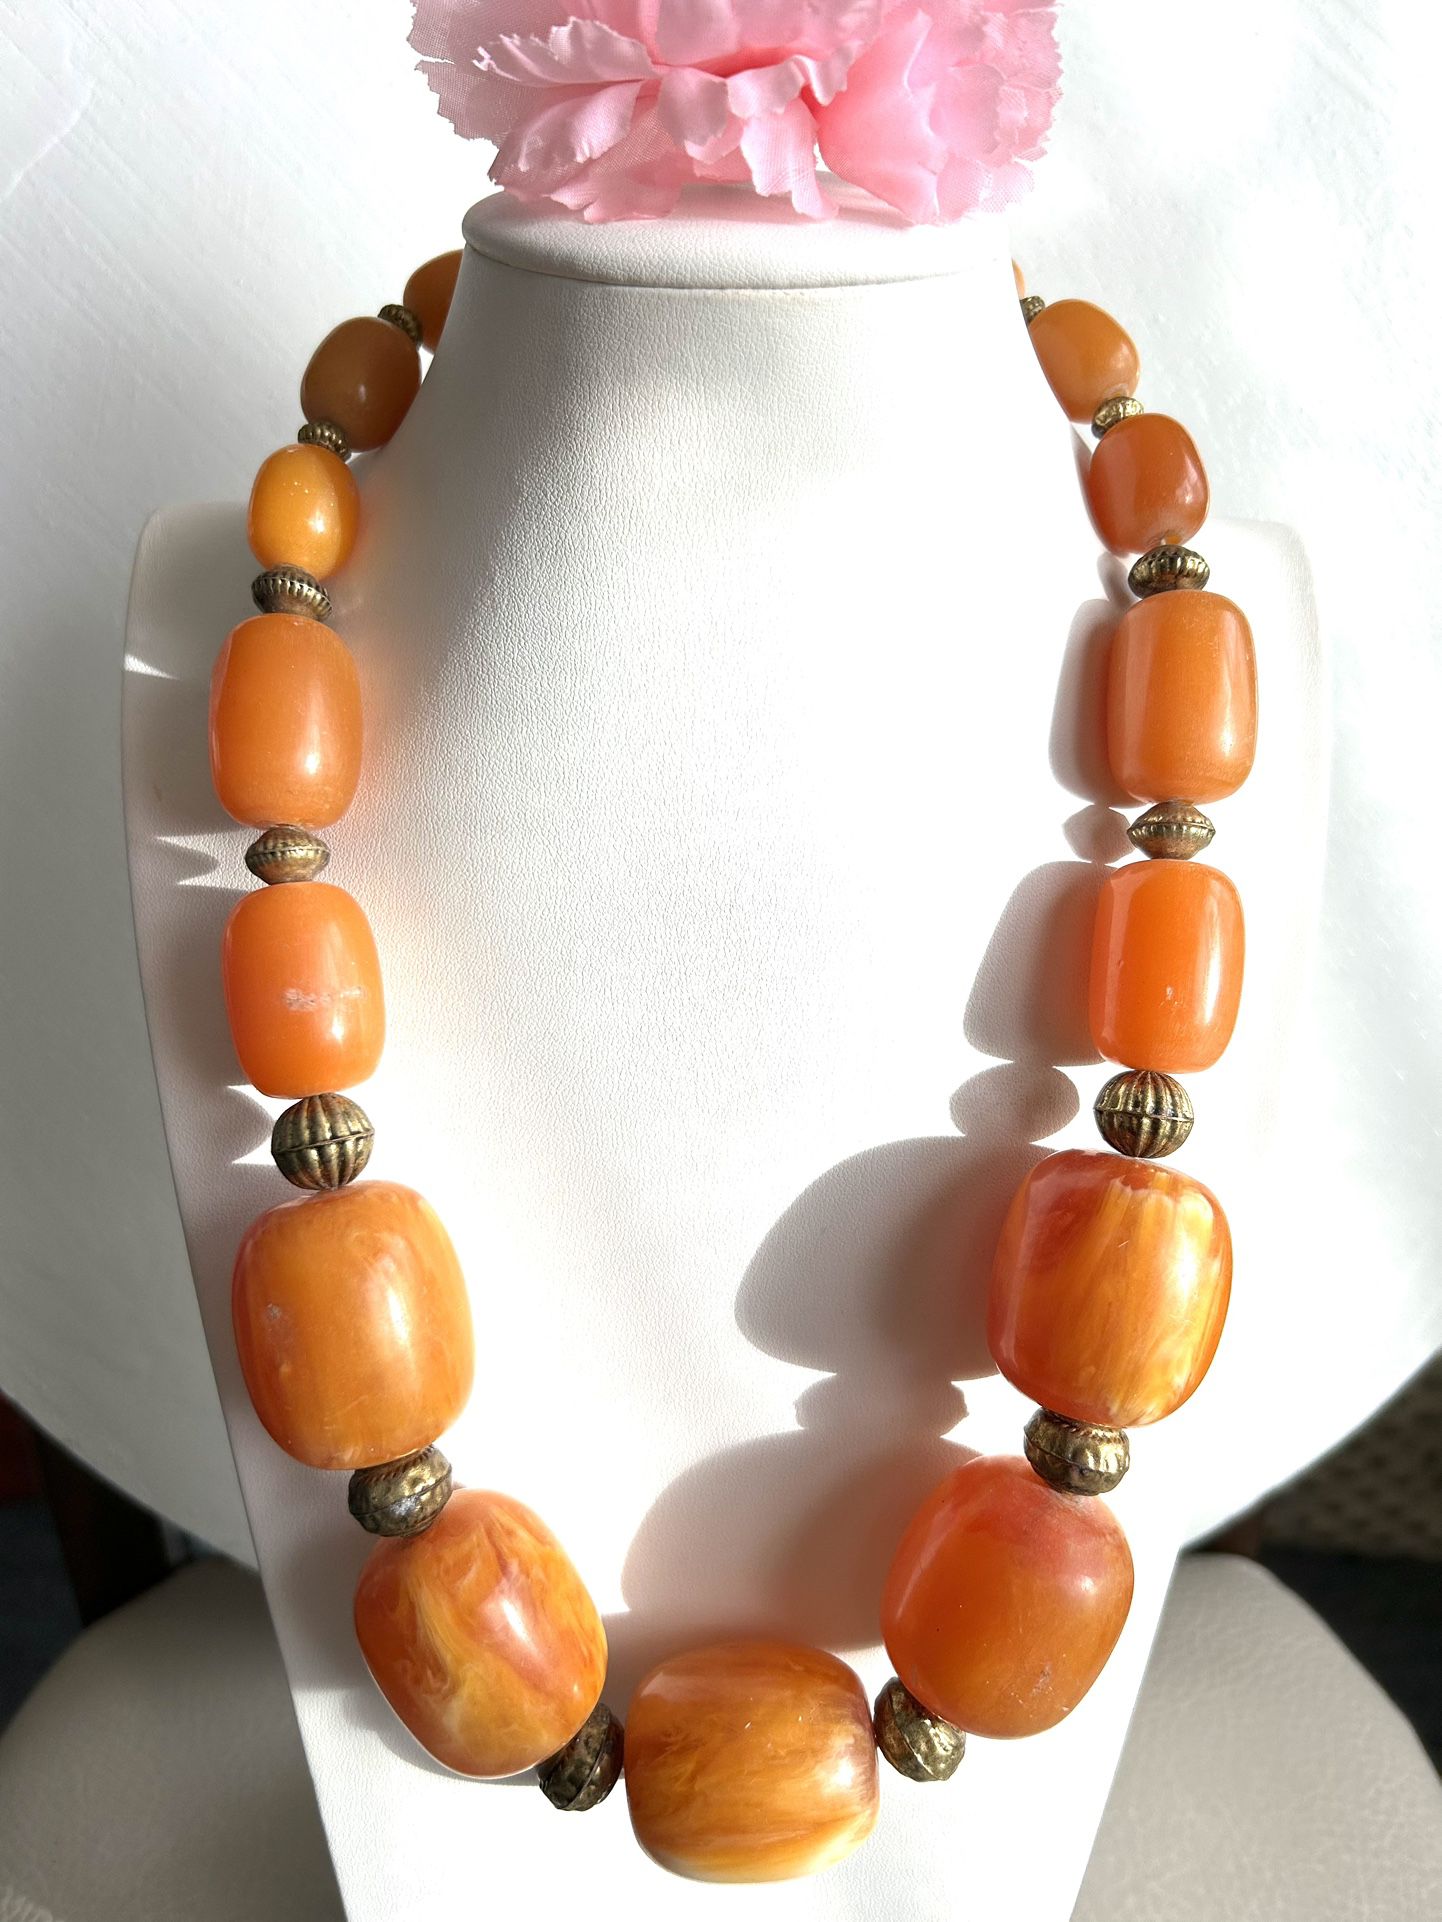 Vintage and beautiful large butter scotch Amber resin handmade necklace 23”inches long